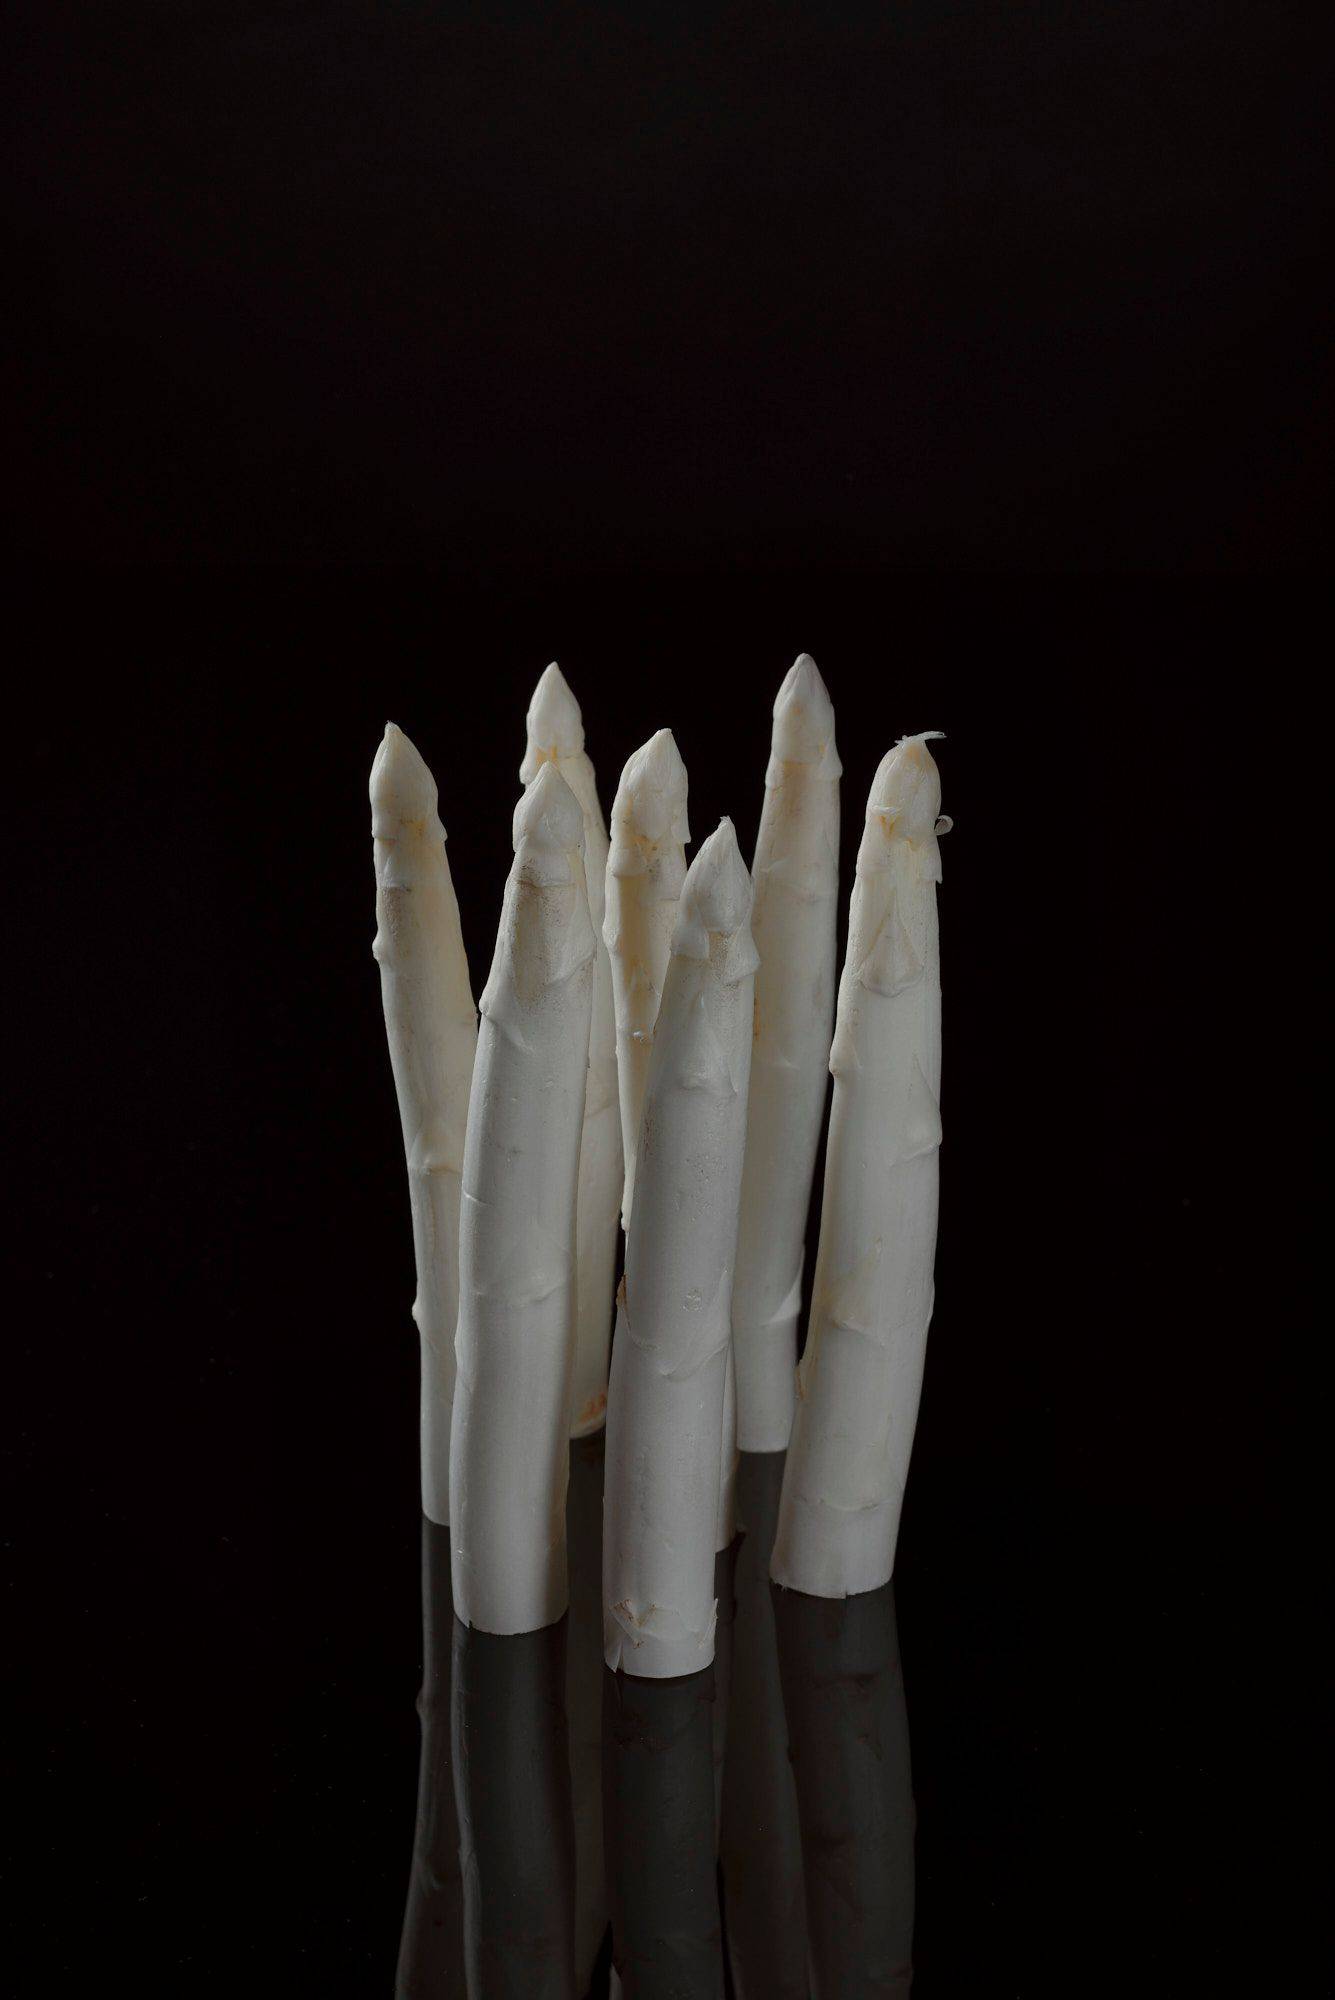 seven pieces of white asparagus with black background